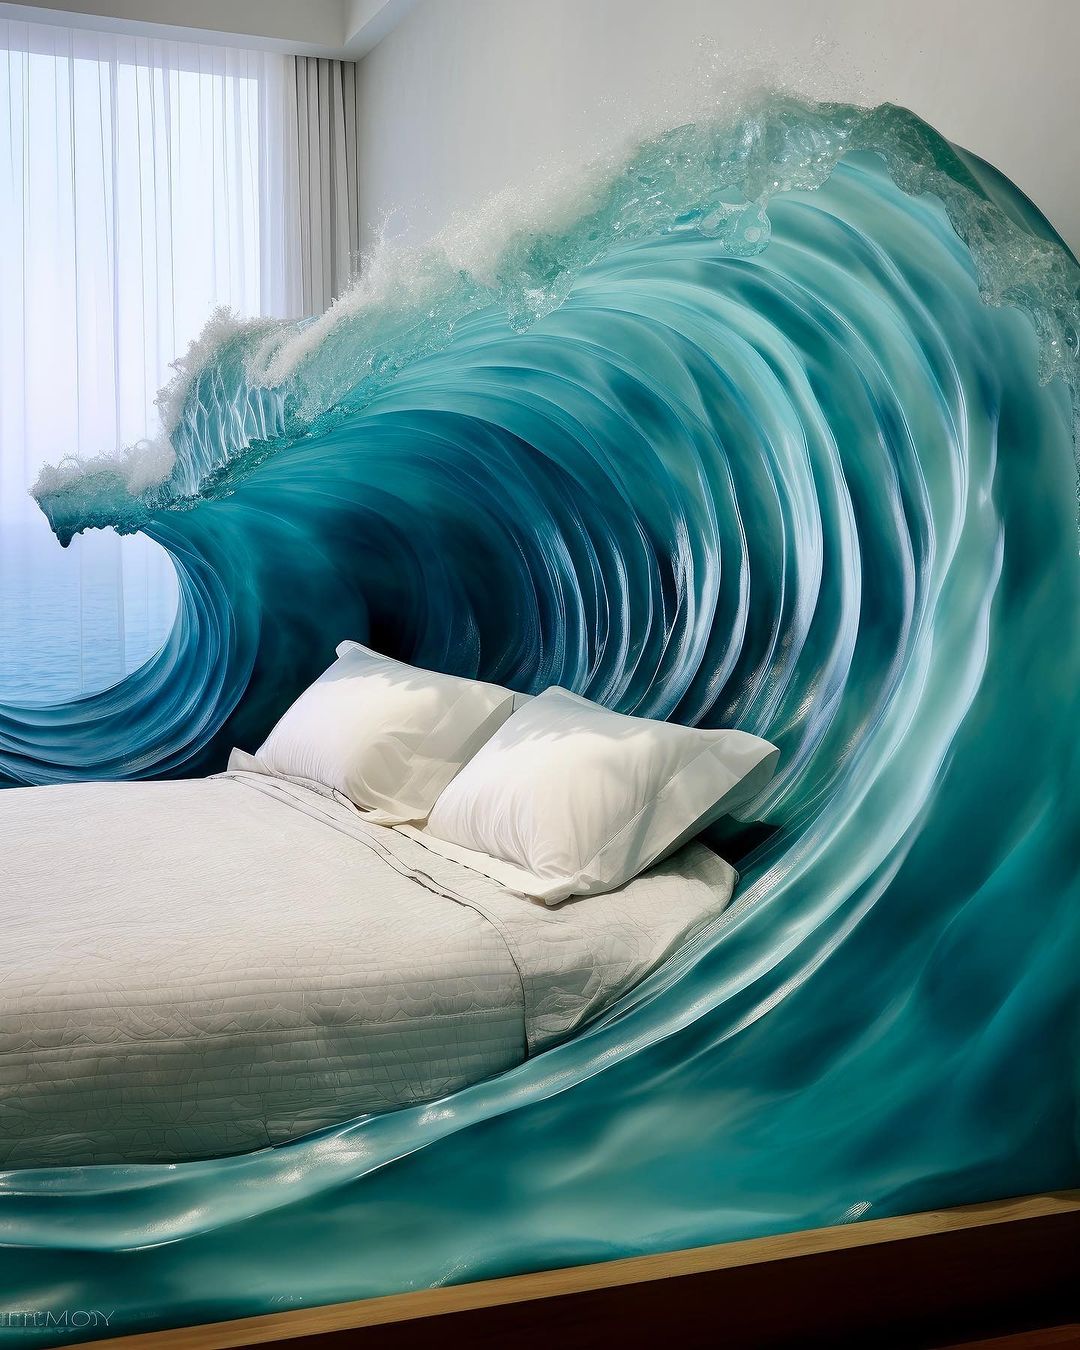 Ocean Waves-Inspired Furniture: Waves of Inspiration Mingle with Home Decor